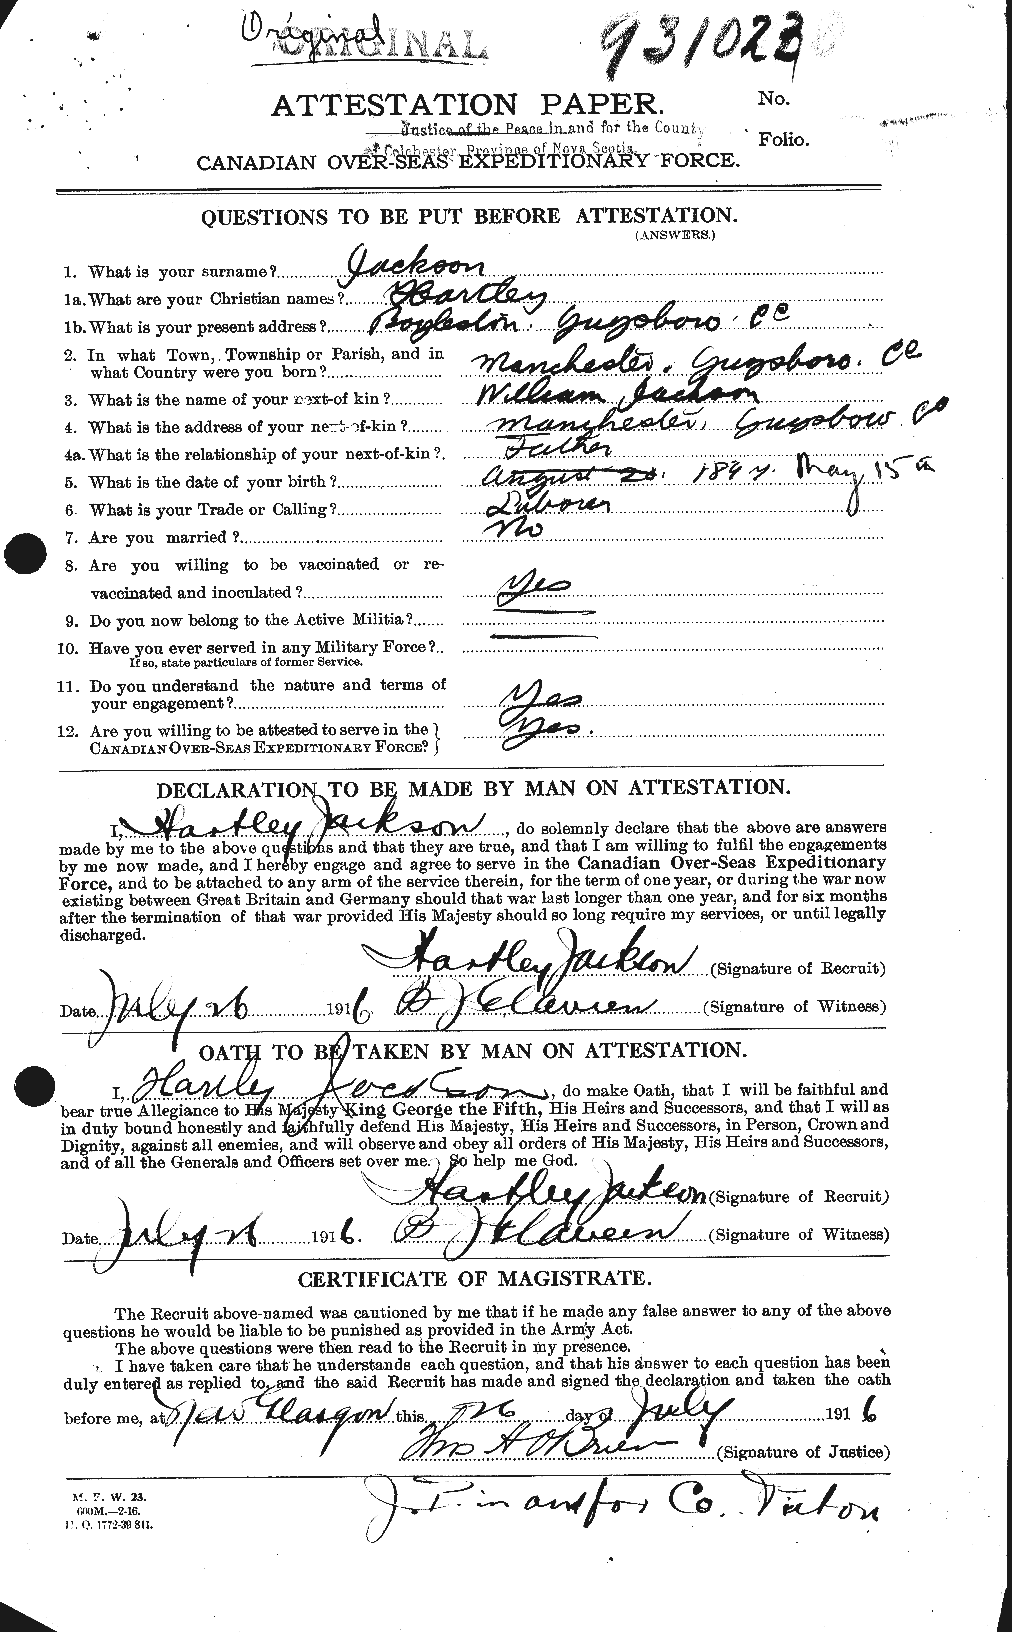 Personnel Records of the First World War - CEF 413643a